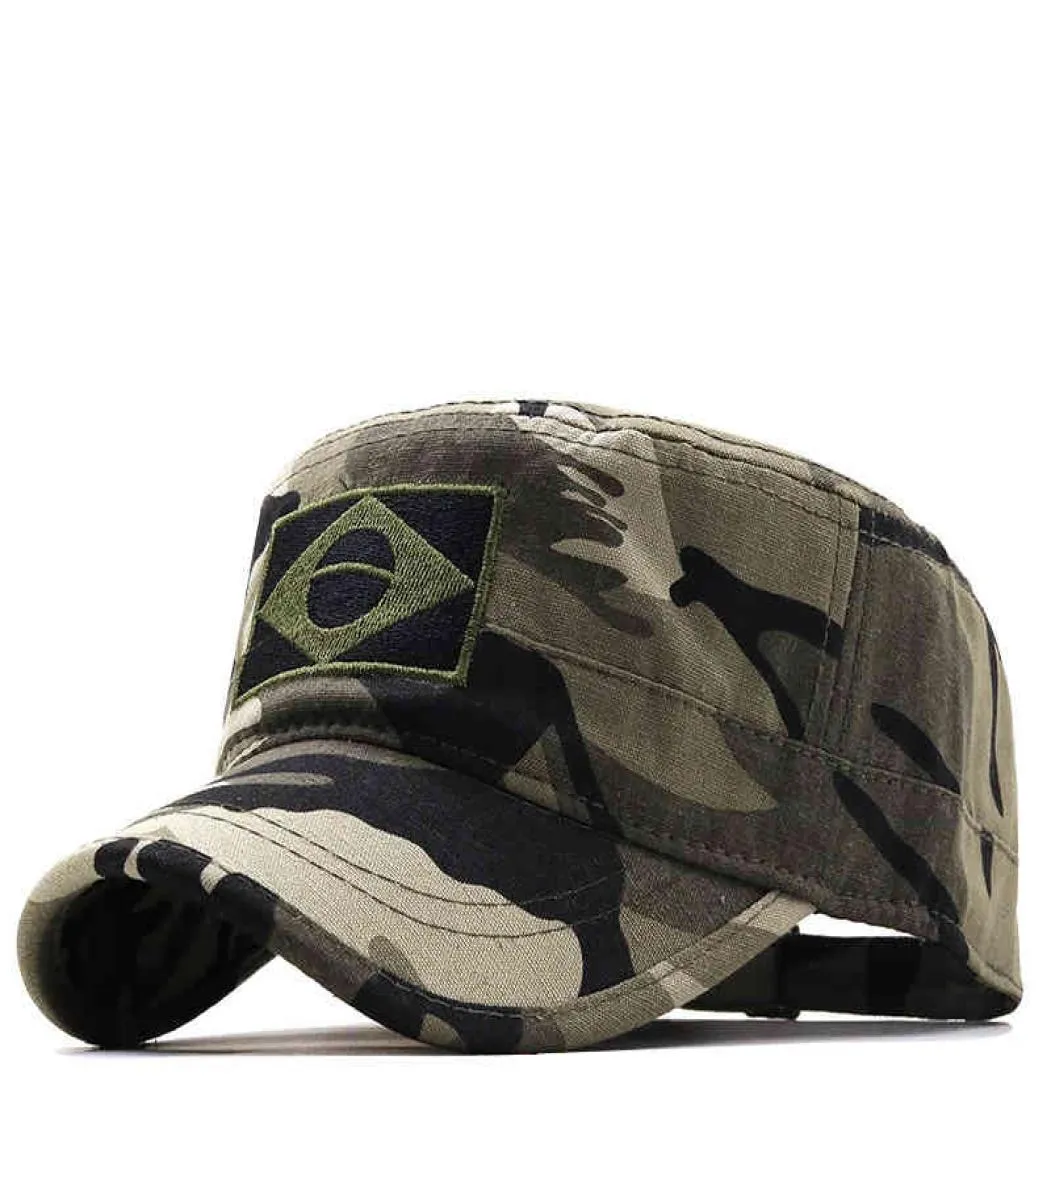 Marines Corps Cap Military Hats Camouflage Flat Top Hat Men Cotton Hhat Brazil Navy broderad Camo6897648